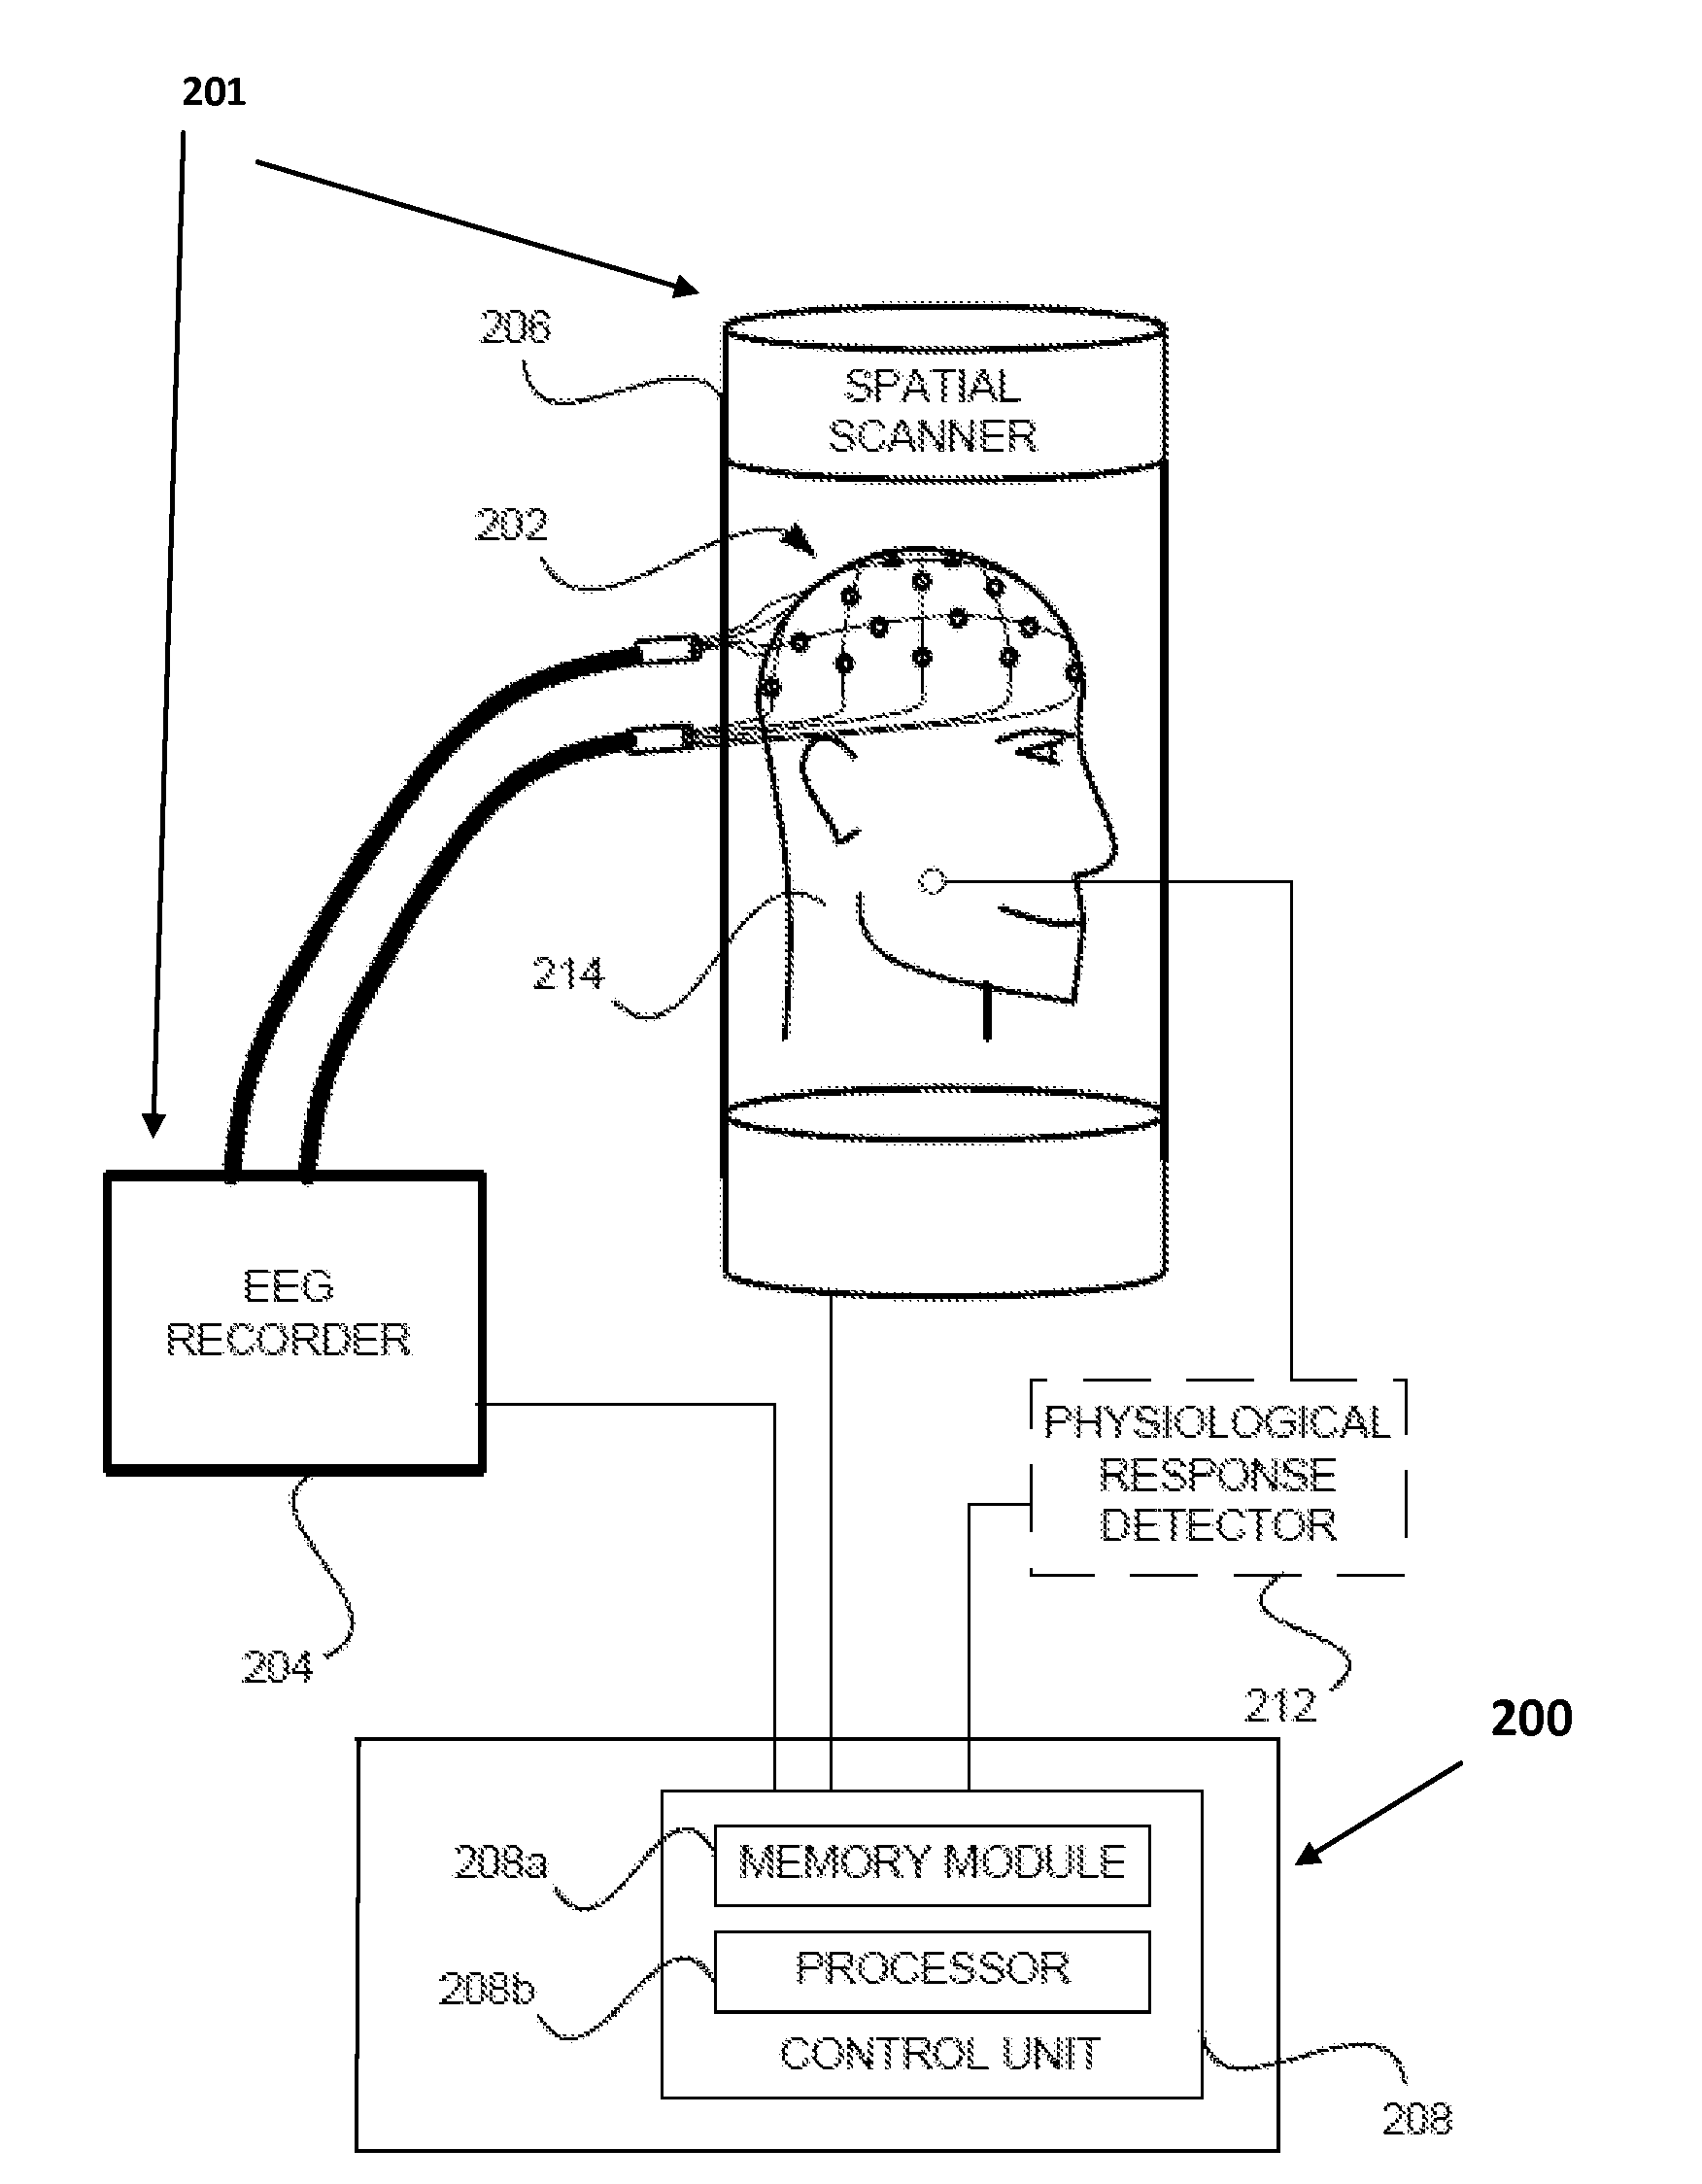 Method and system for use in monitoring neural activity in a subject's brain